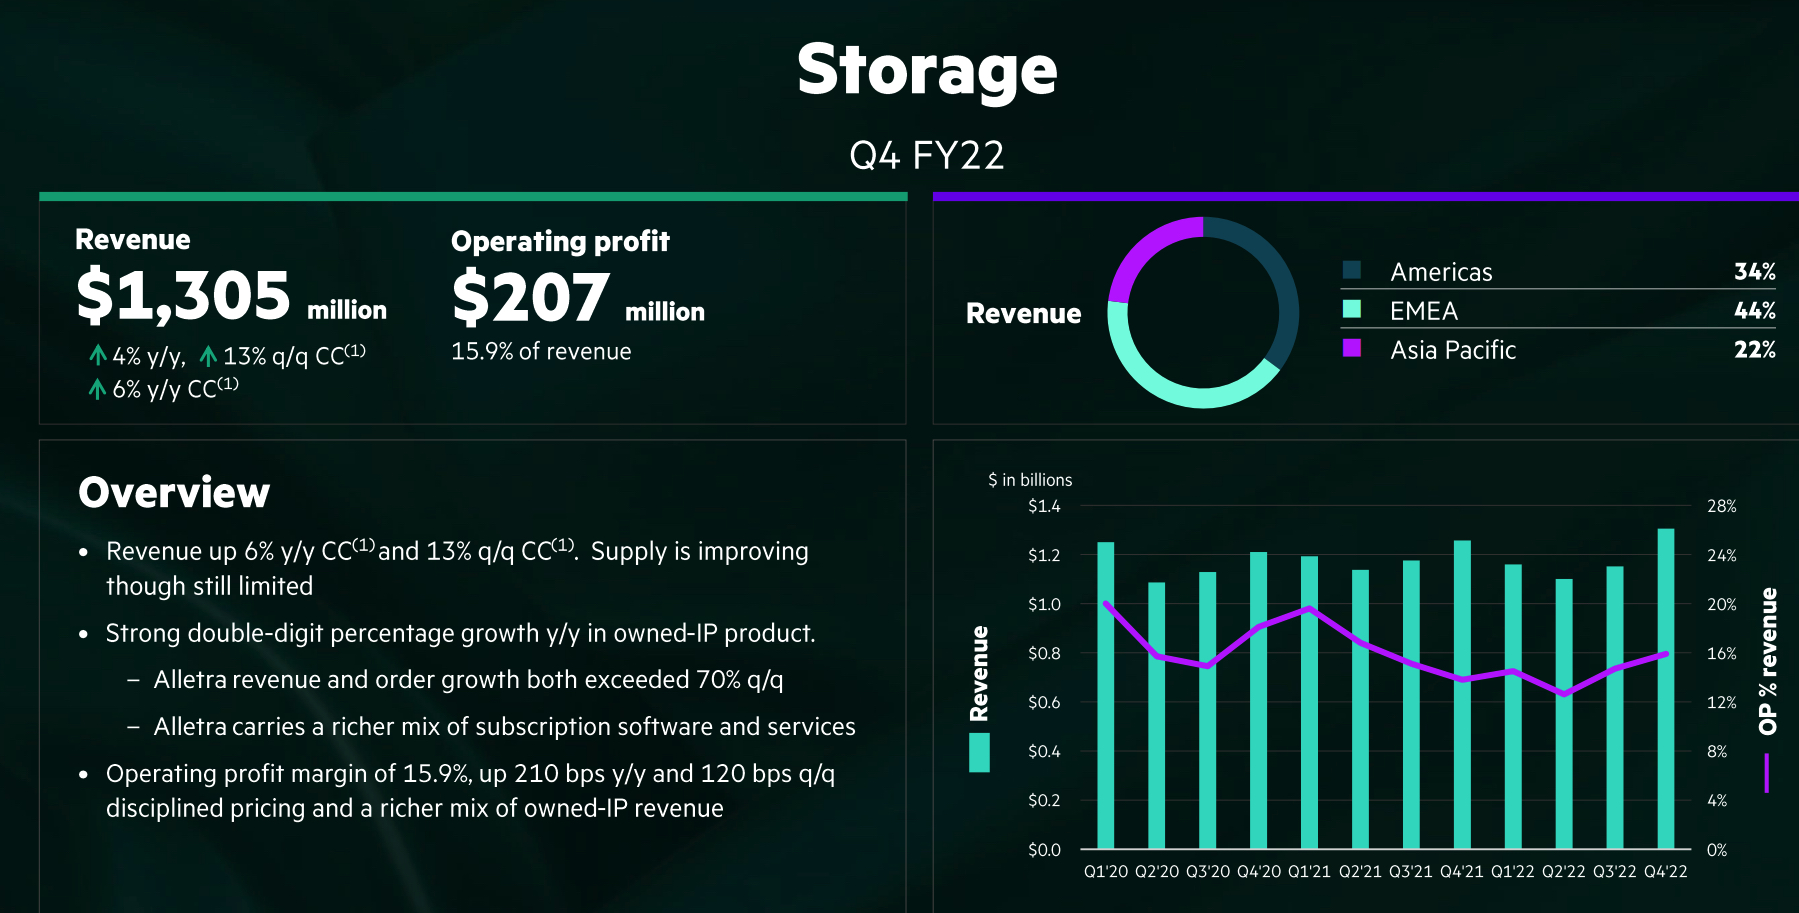 Hpe Fiscal 4q22 Financial Results